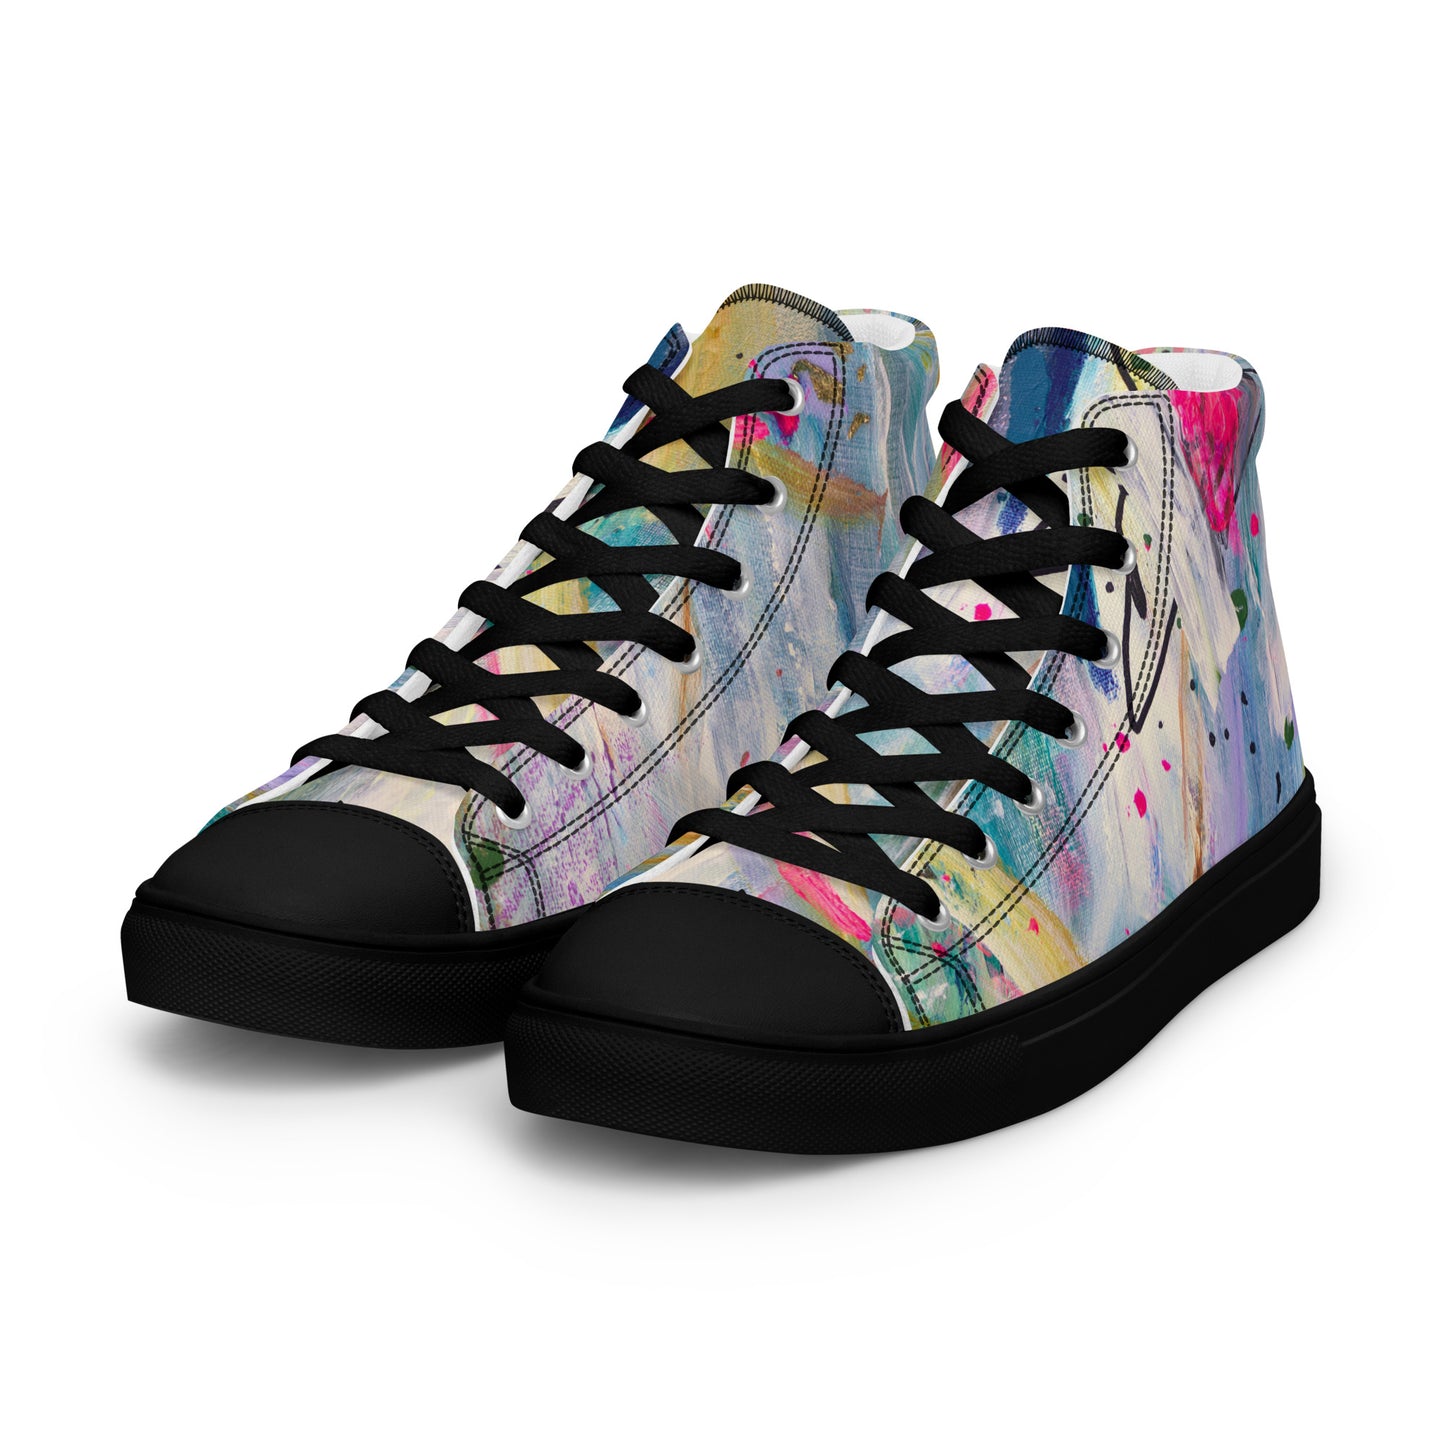 Free Fall by Sara Franklin | Women’s high top canvas shoes